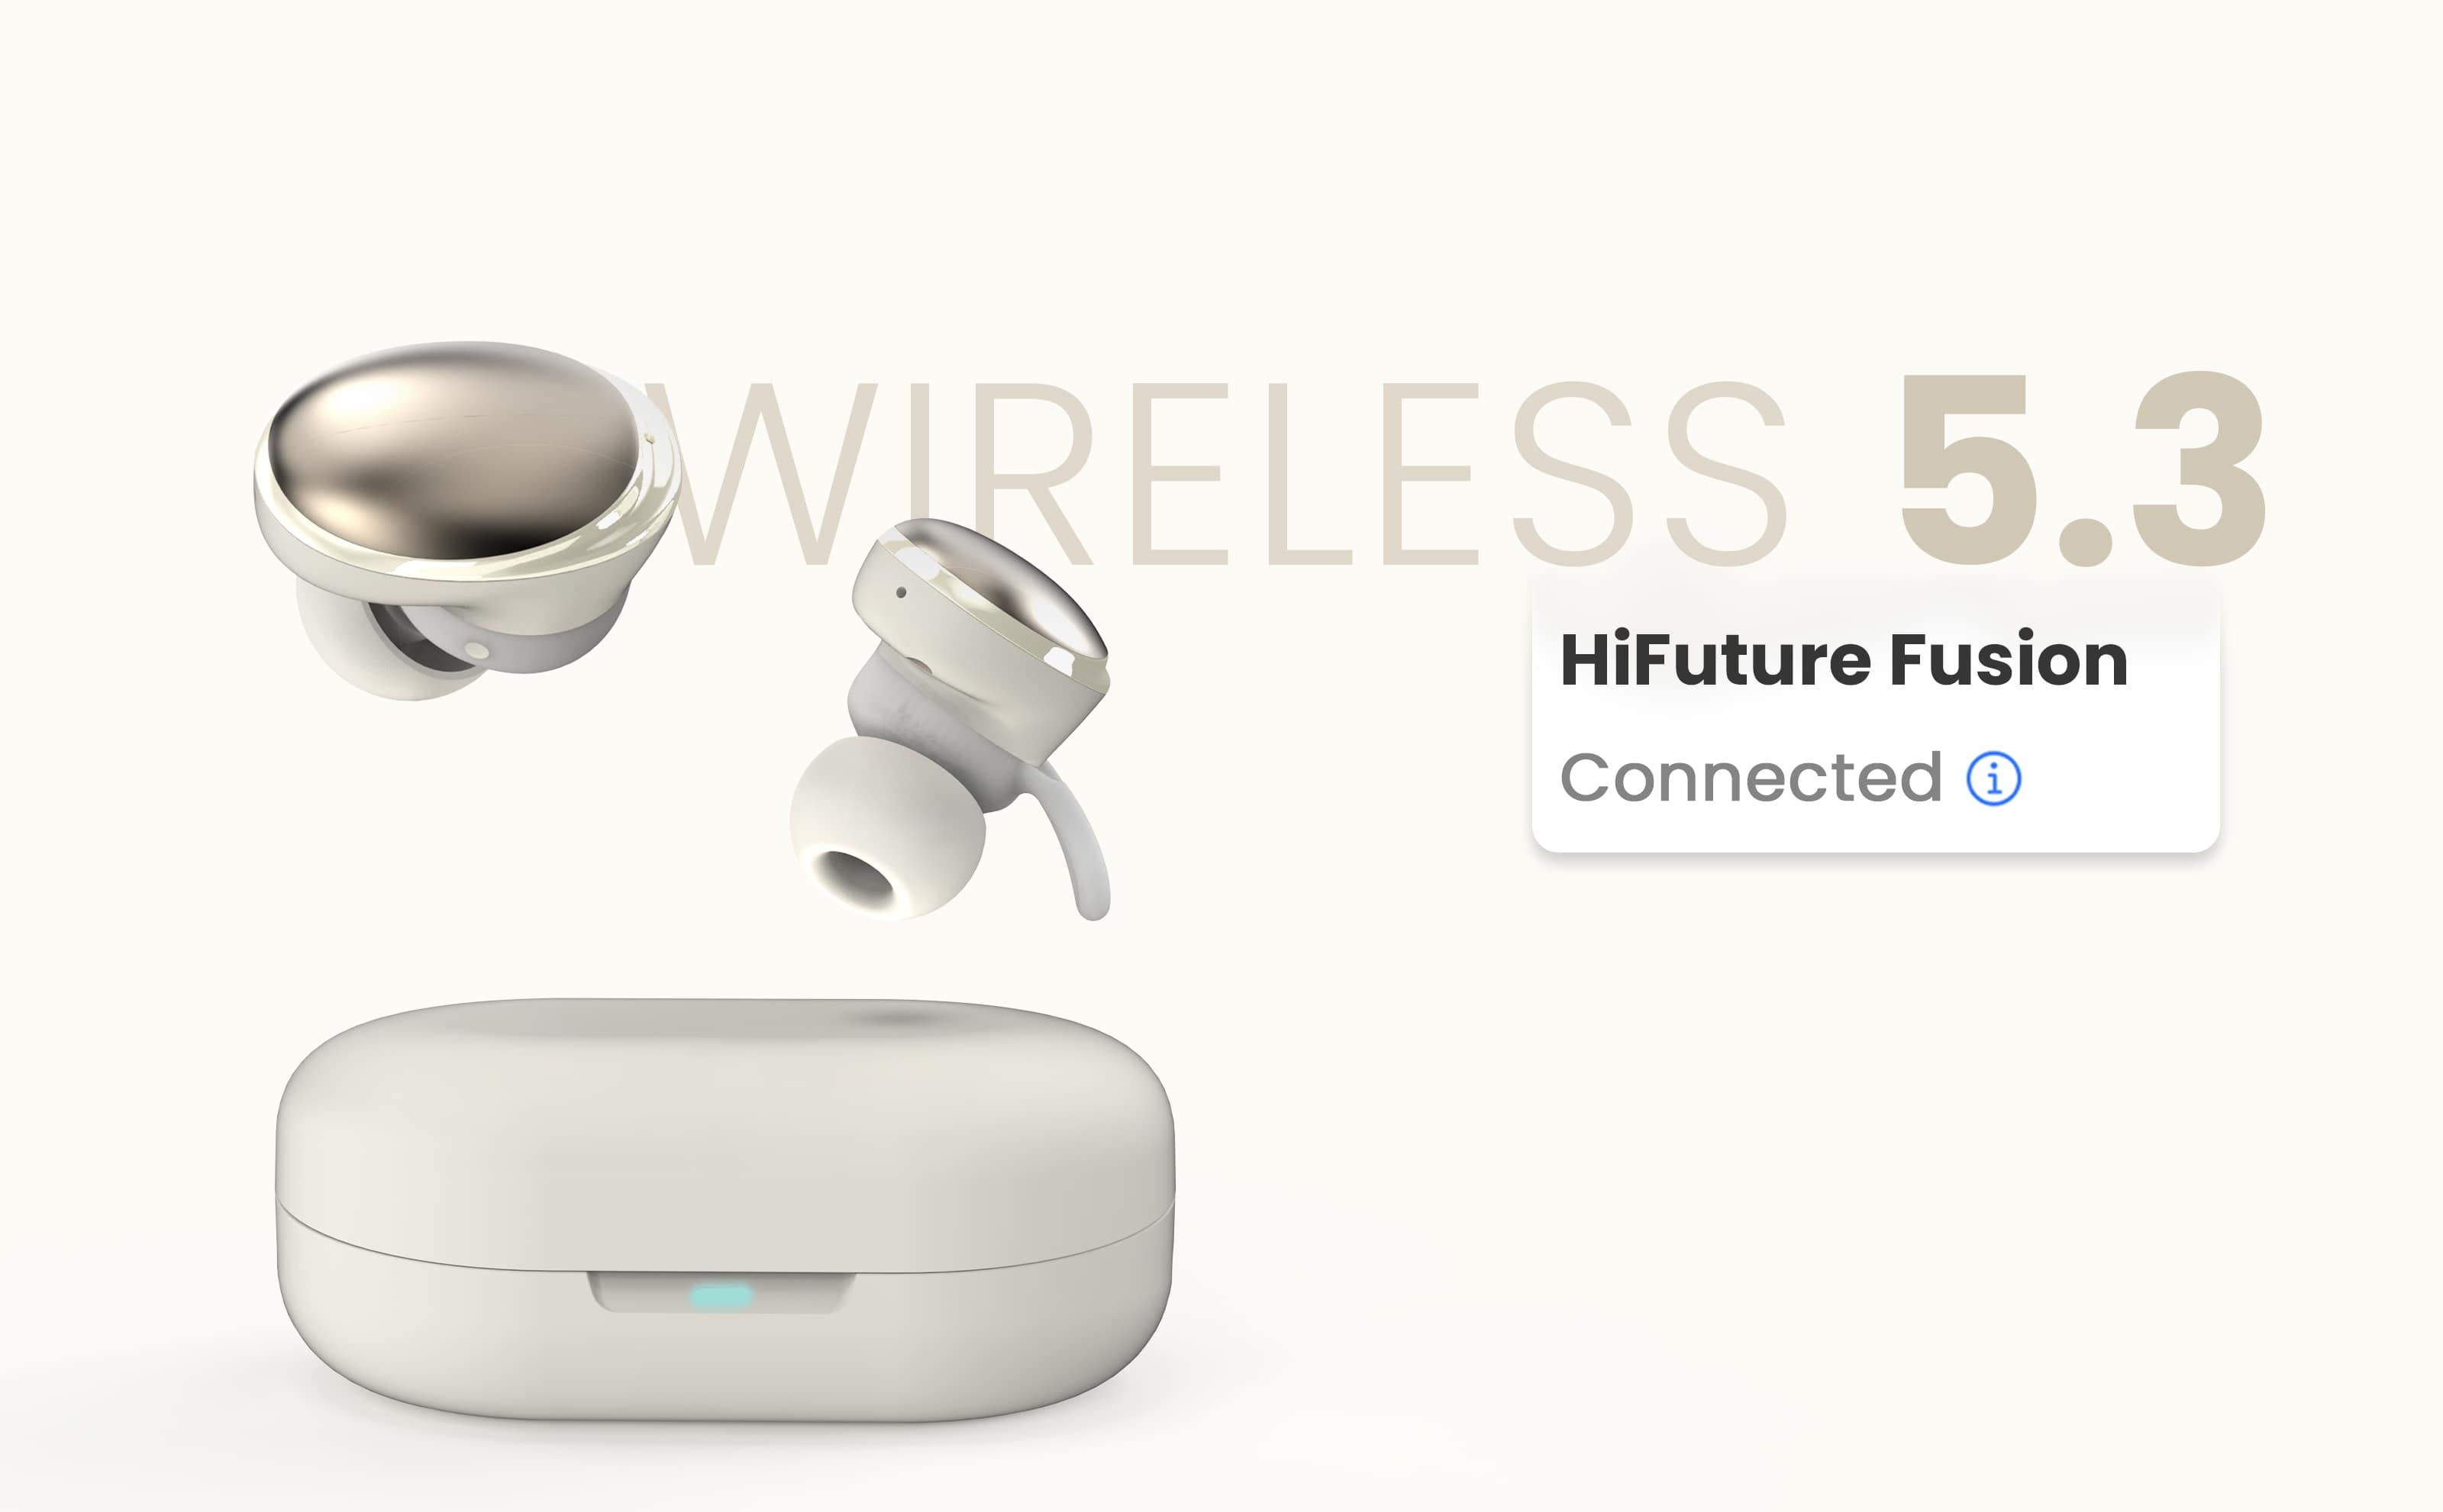 Hifuture Fusion with wireless 5.3 connection